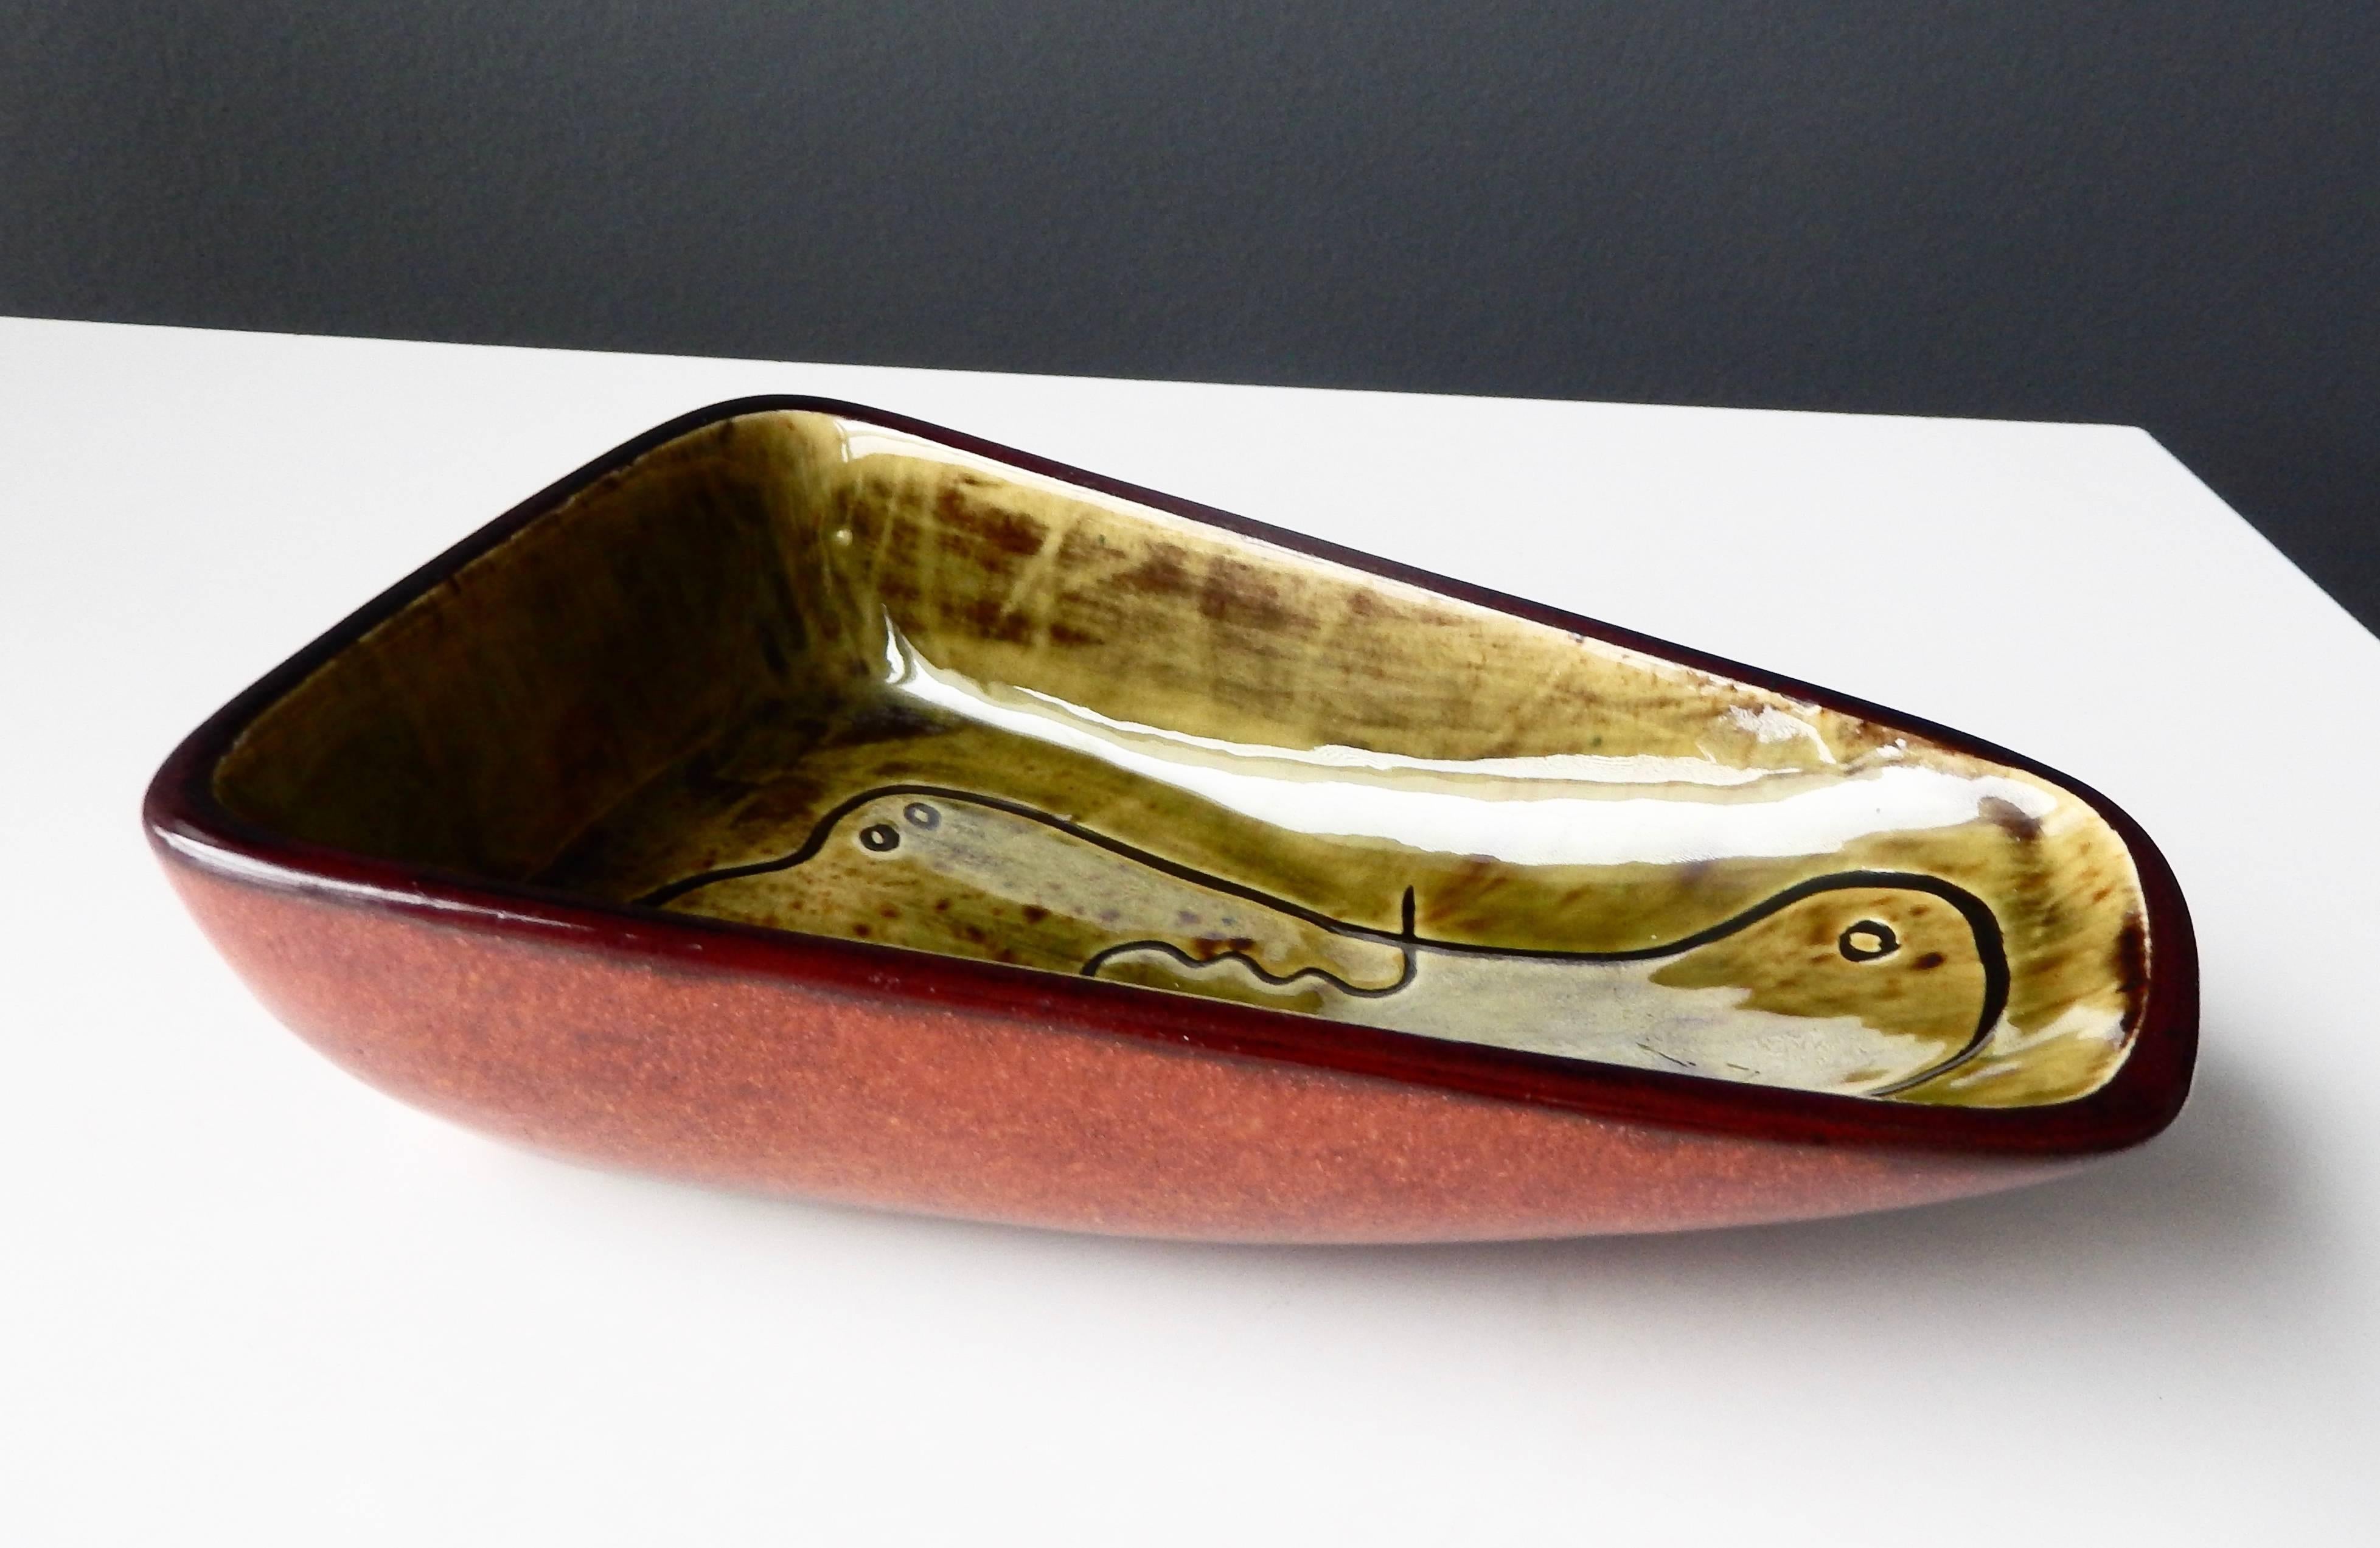 A glazed ceramic dish with an abstract design by the American studio potter Eugene Deutch (1904-59). Born in Budapest, Deutch left Hungary in 1923 and moved to France, briefly studying sculpture under Brancusi. Four years later, he moved to Chicago